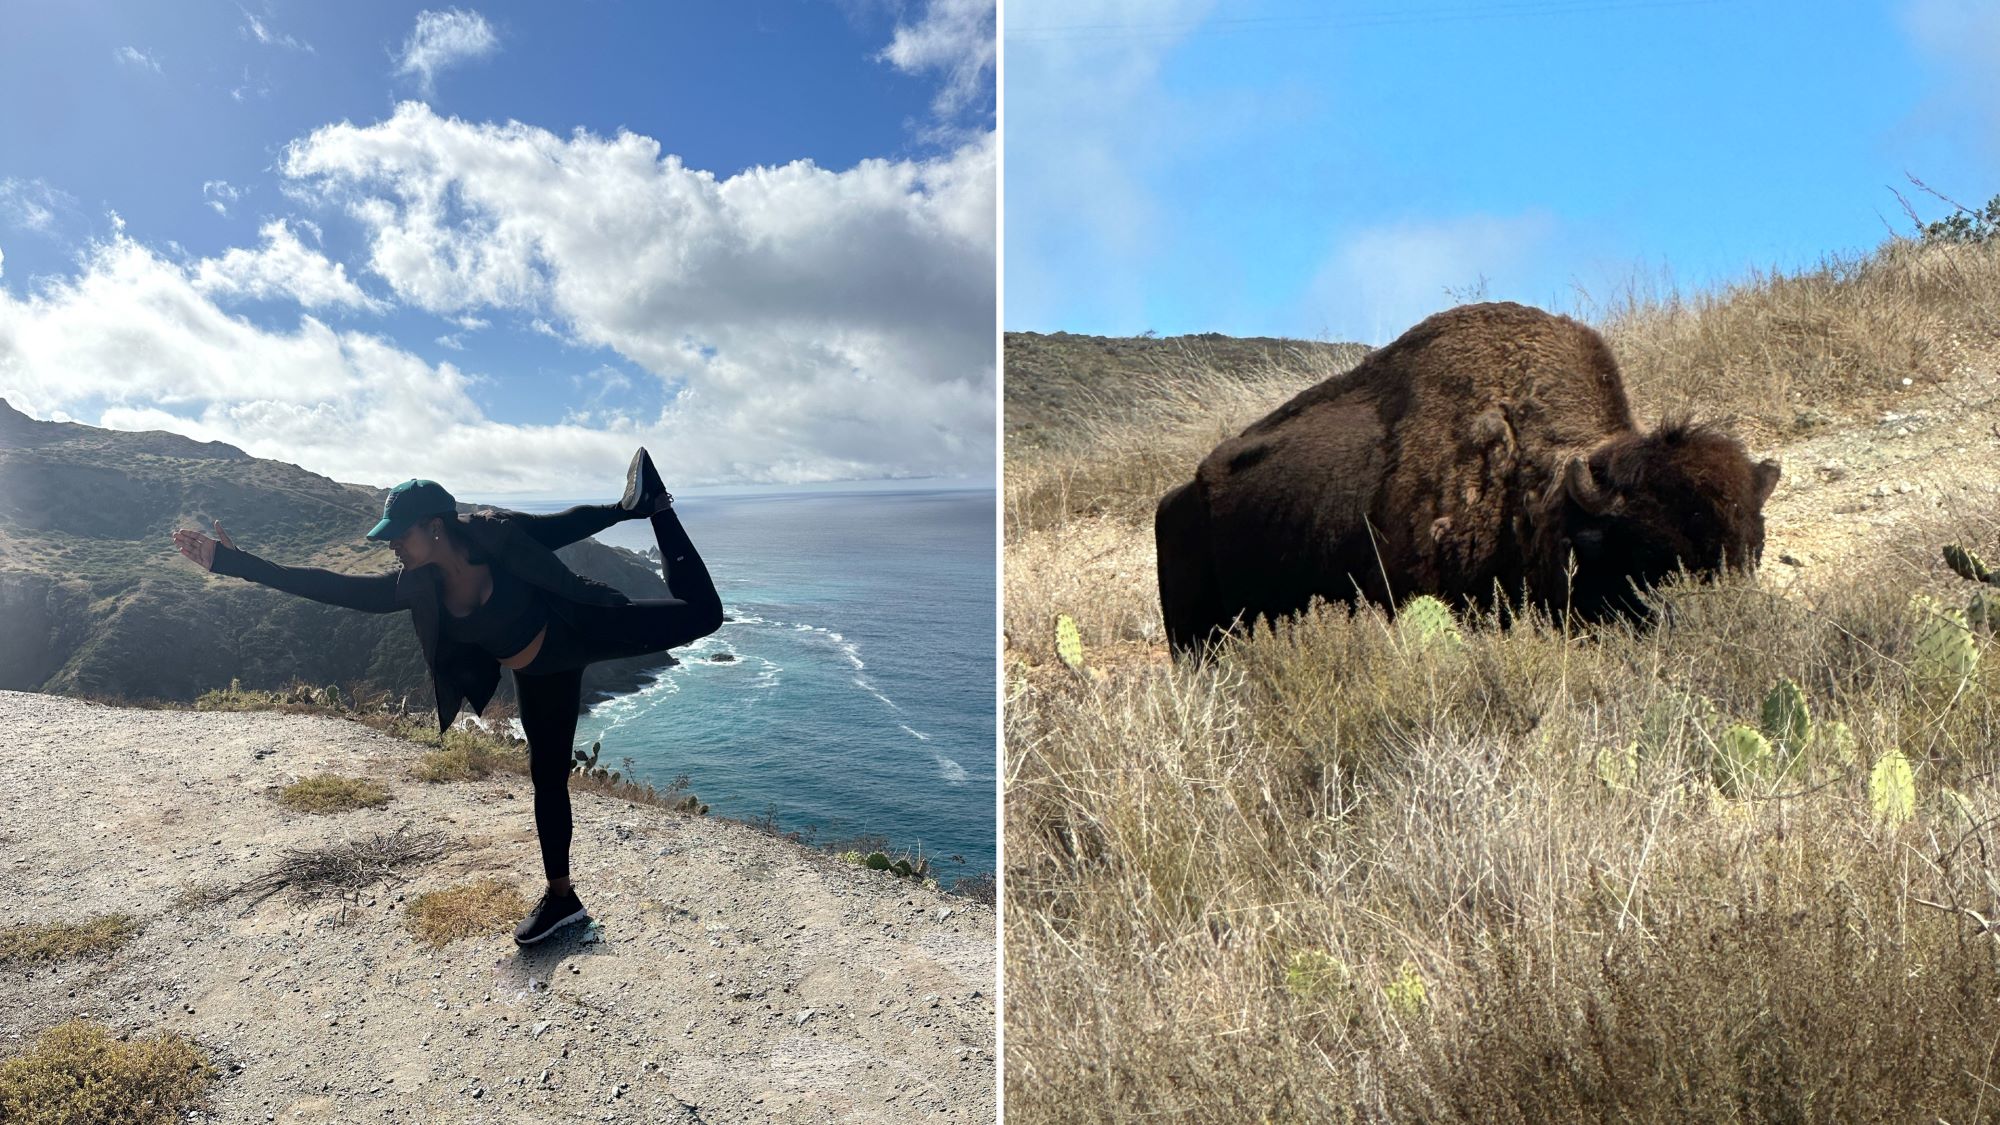 Looking for things to do in Catalina? Let Catalina Backcountry plan an outdoor adventure for you. An image of Ariel doing a yoga pose with the water in the background, and a large bison grazing.